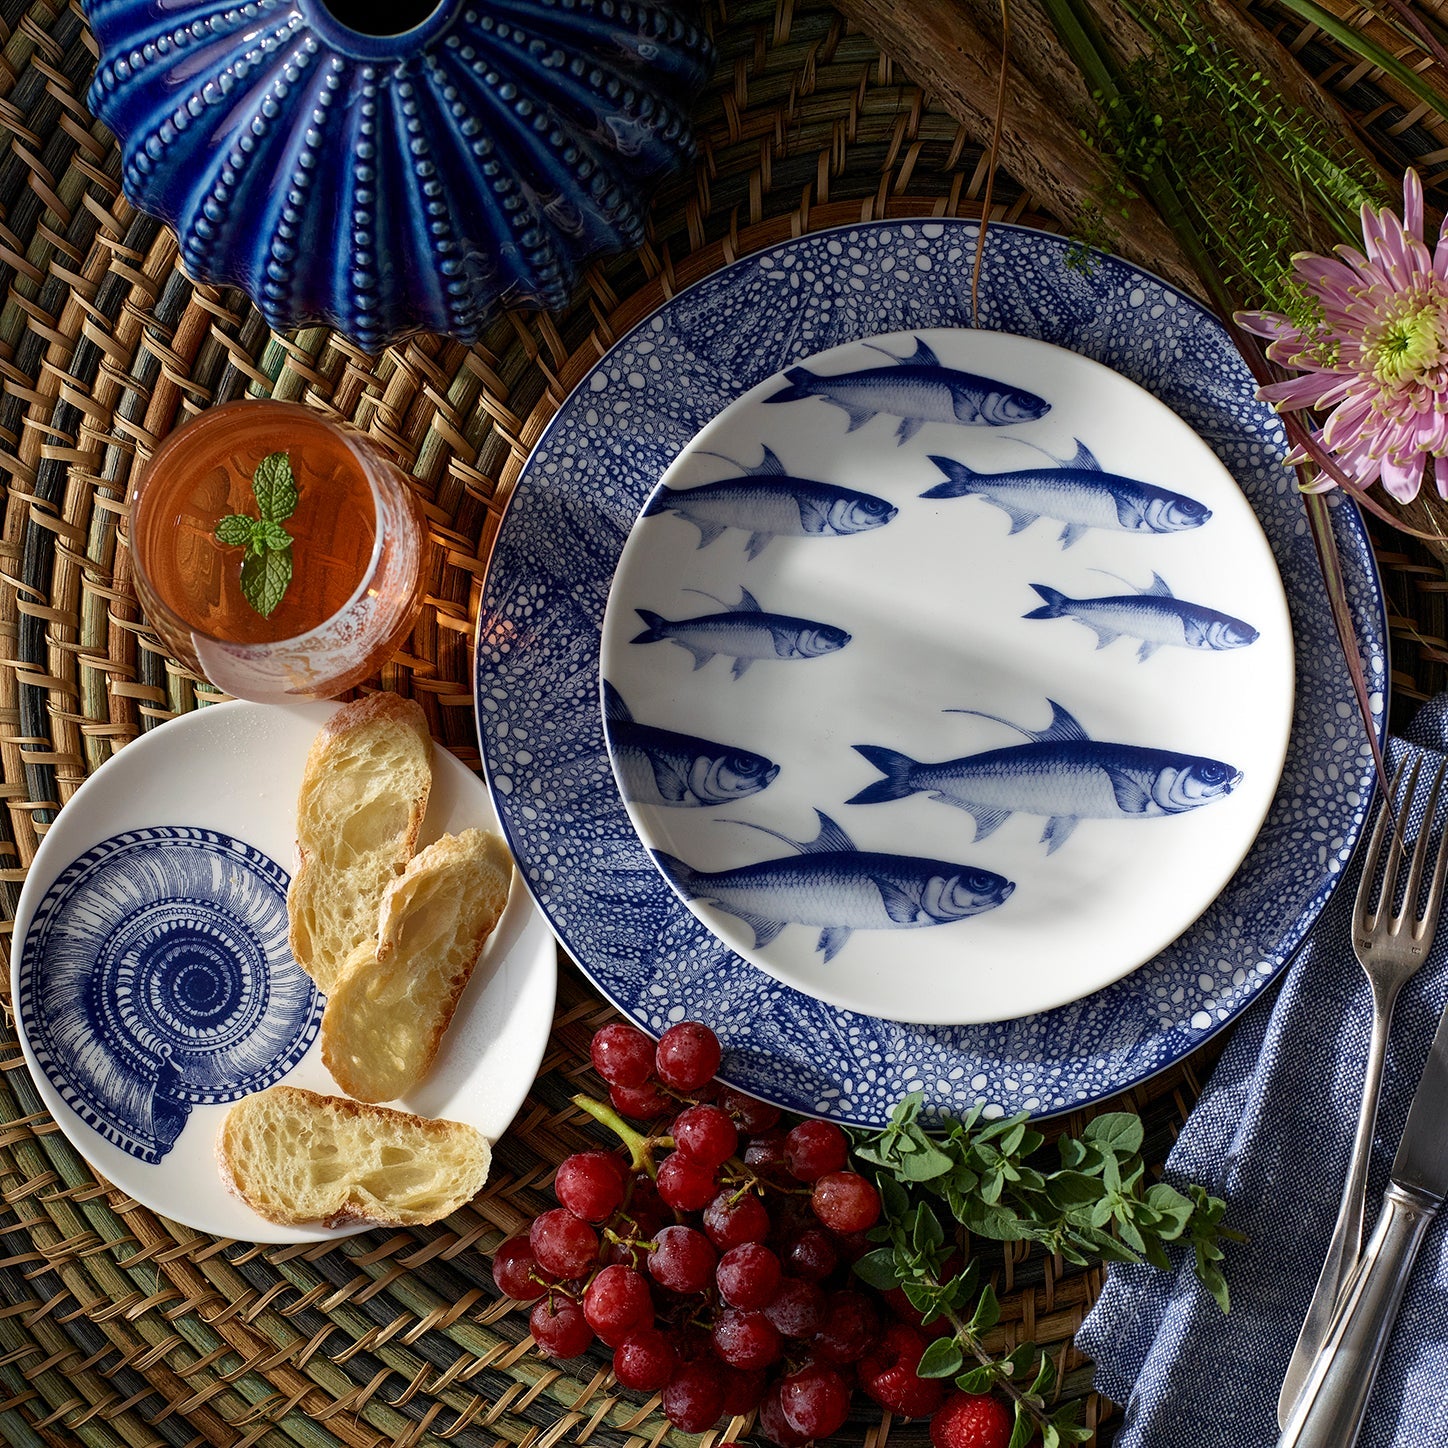 Four heirloom-quality Shells Small Plates by Caskata Artisanal Home featuring blue sea shell designs in different styles are arranged in an overlapping pattern on a white background, showcasing their place in a refined beach collection.